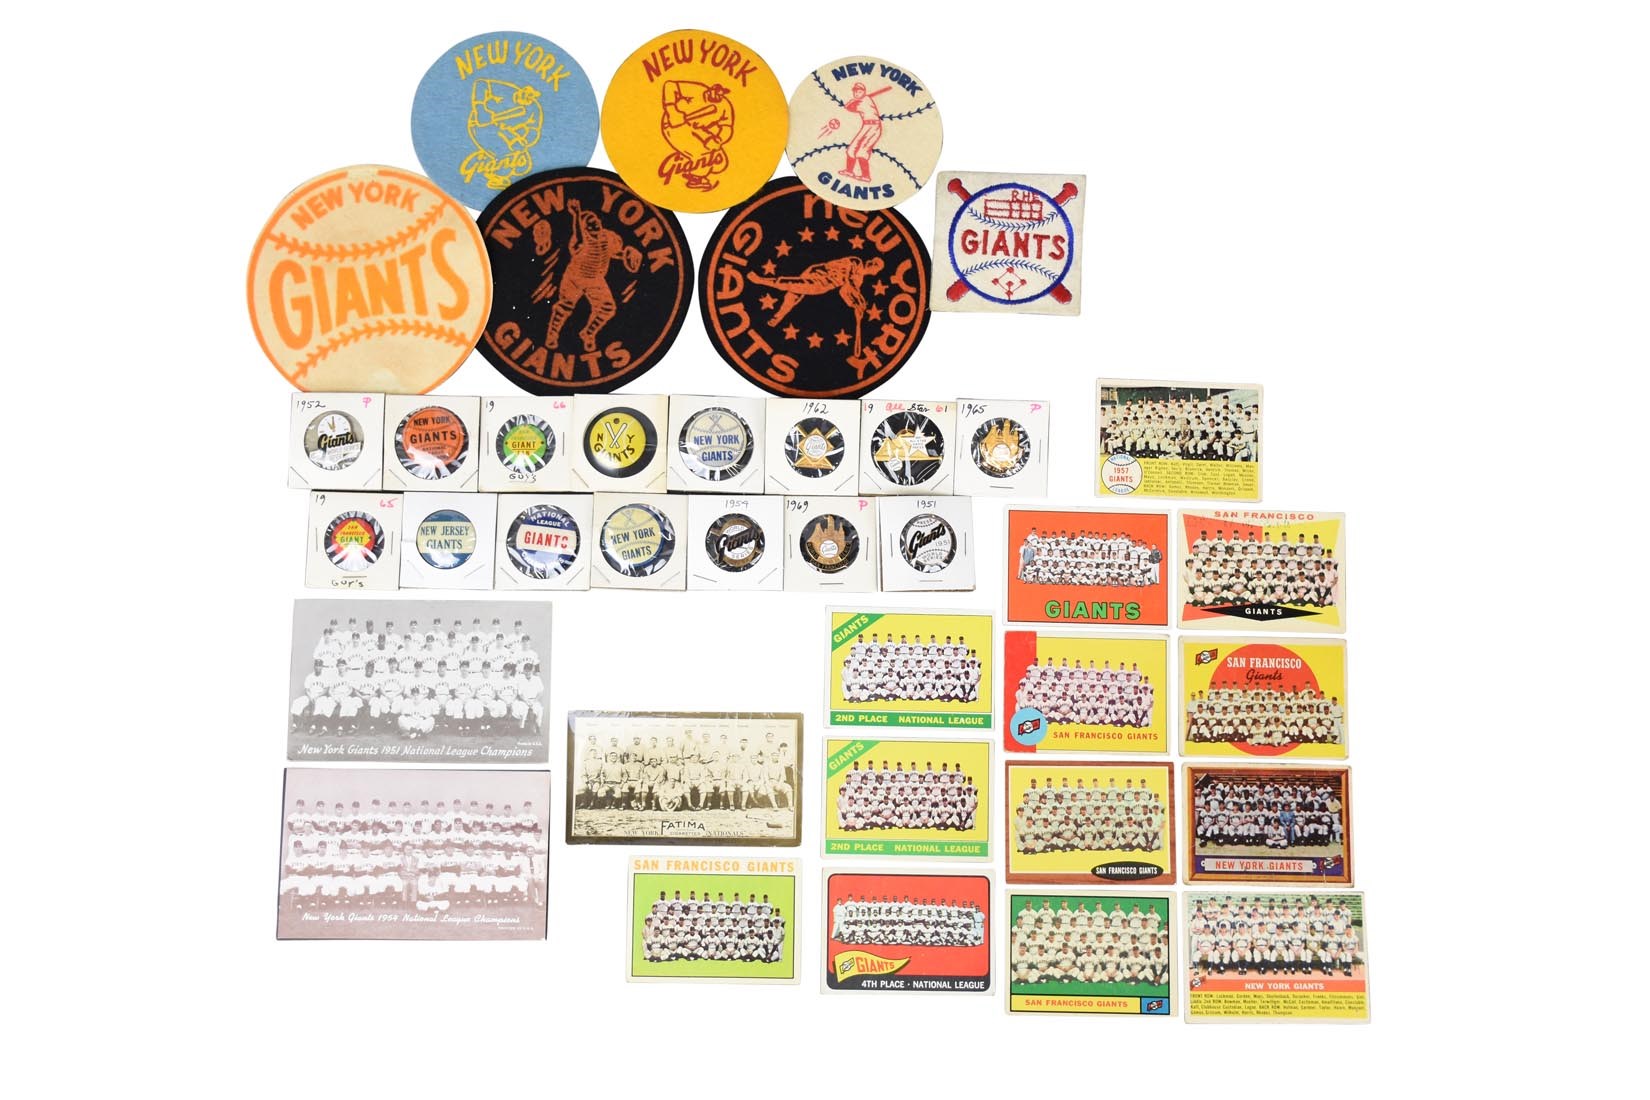 NY Yankees, Giants & Mets - NY/SF Giants Collection w/1950s World Series Press Pins (300+)